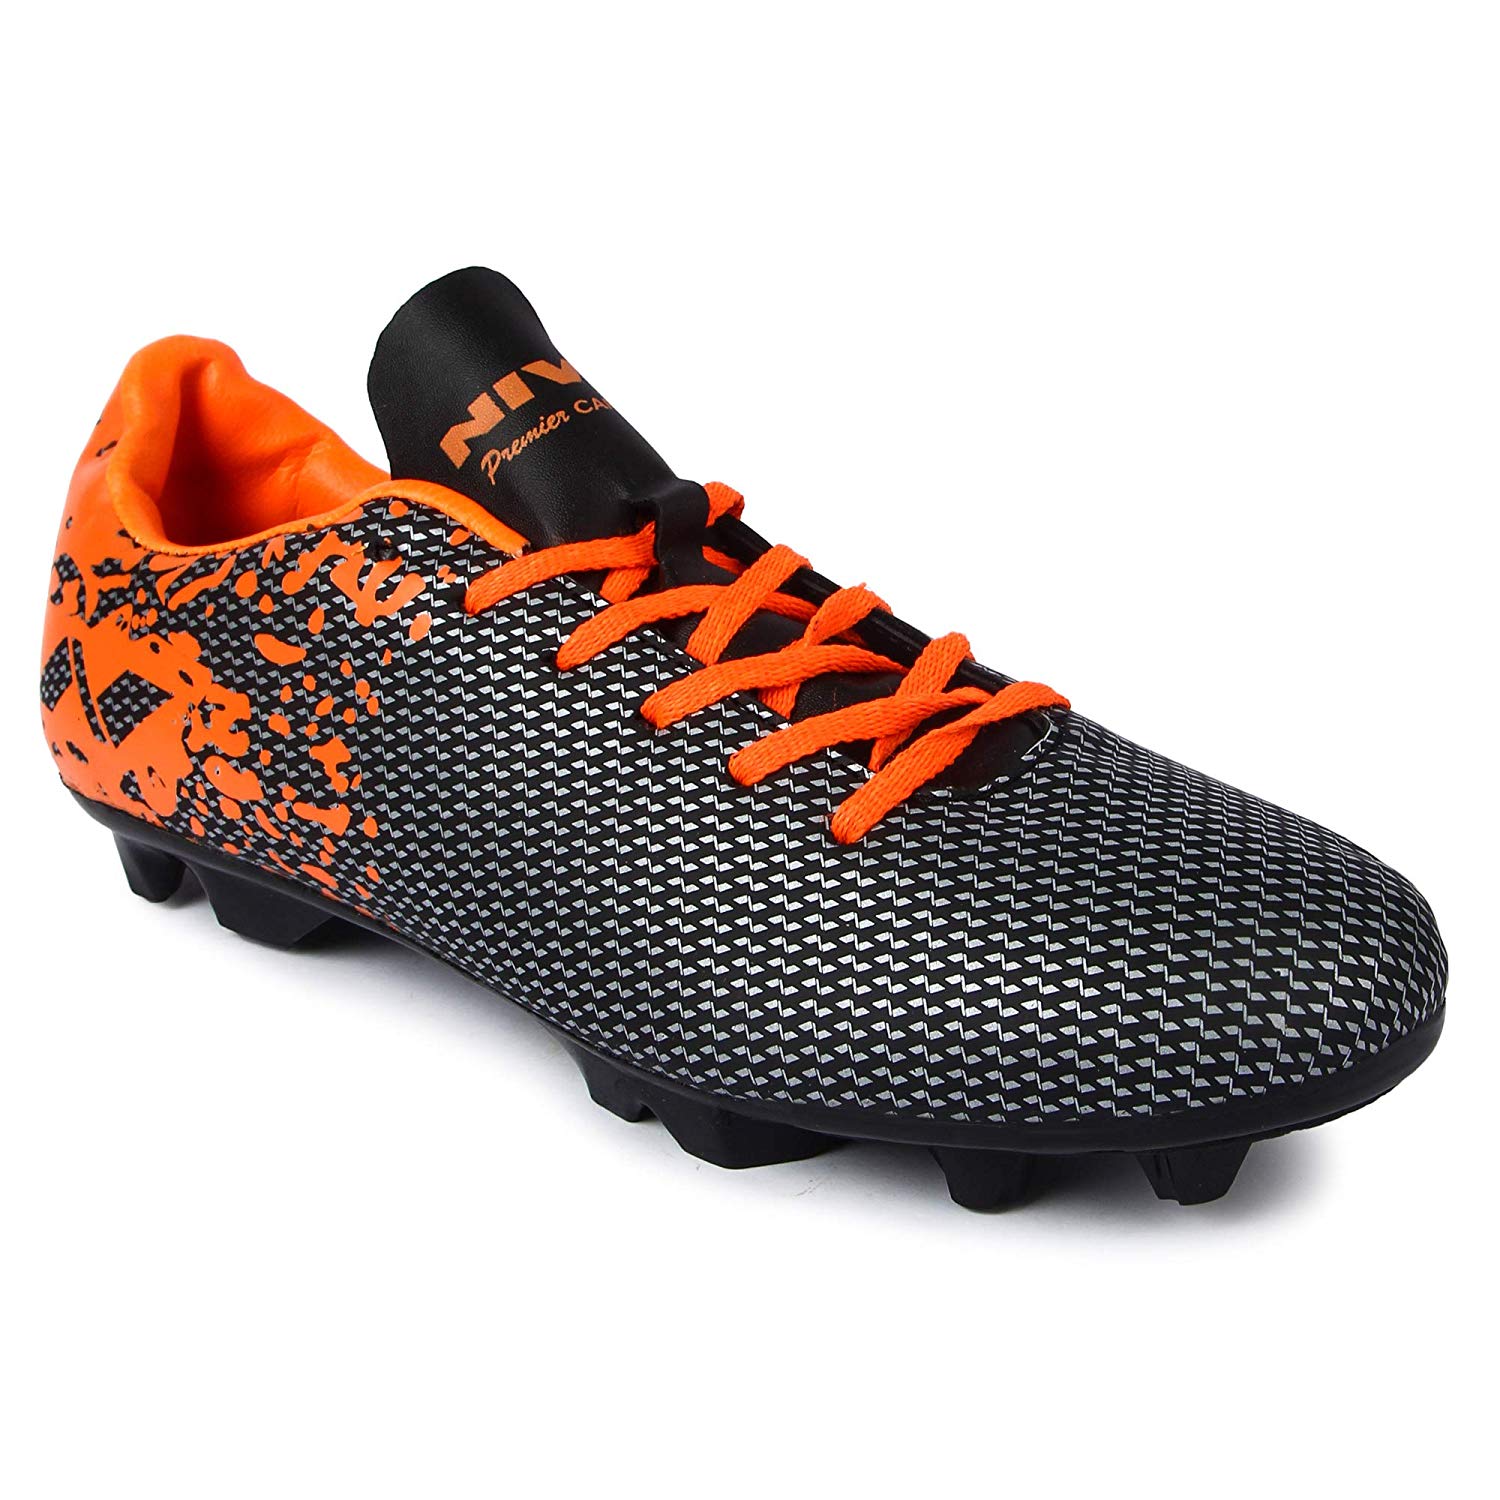 [Top 10] Best Football Shoes Under ₹1000 in India - 2021 - ShoppersVila